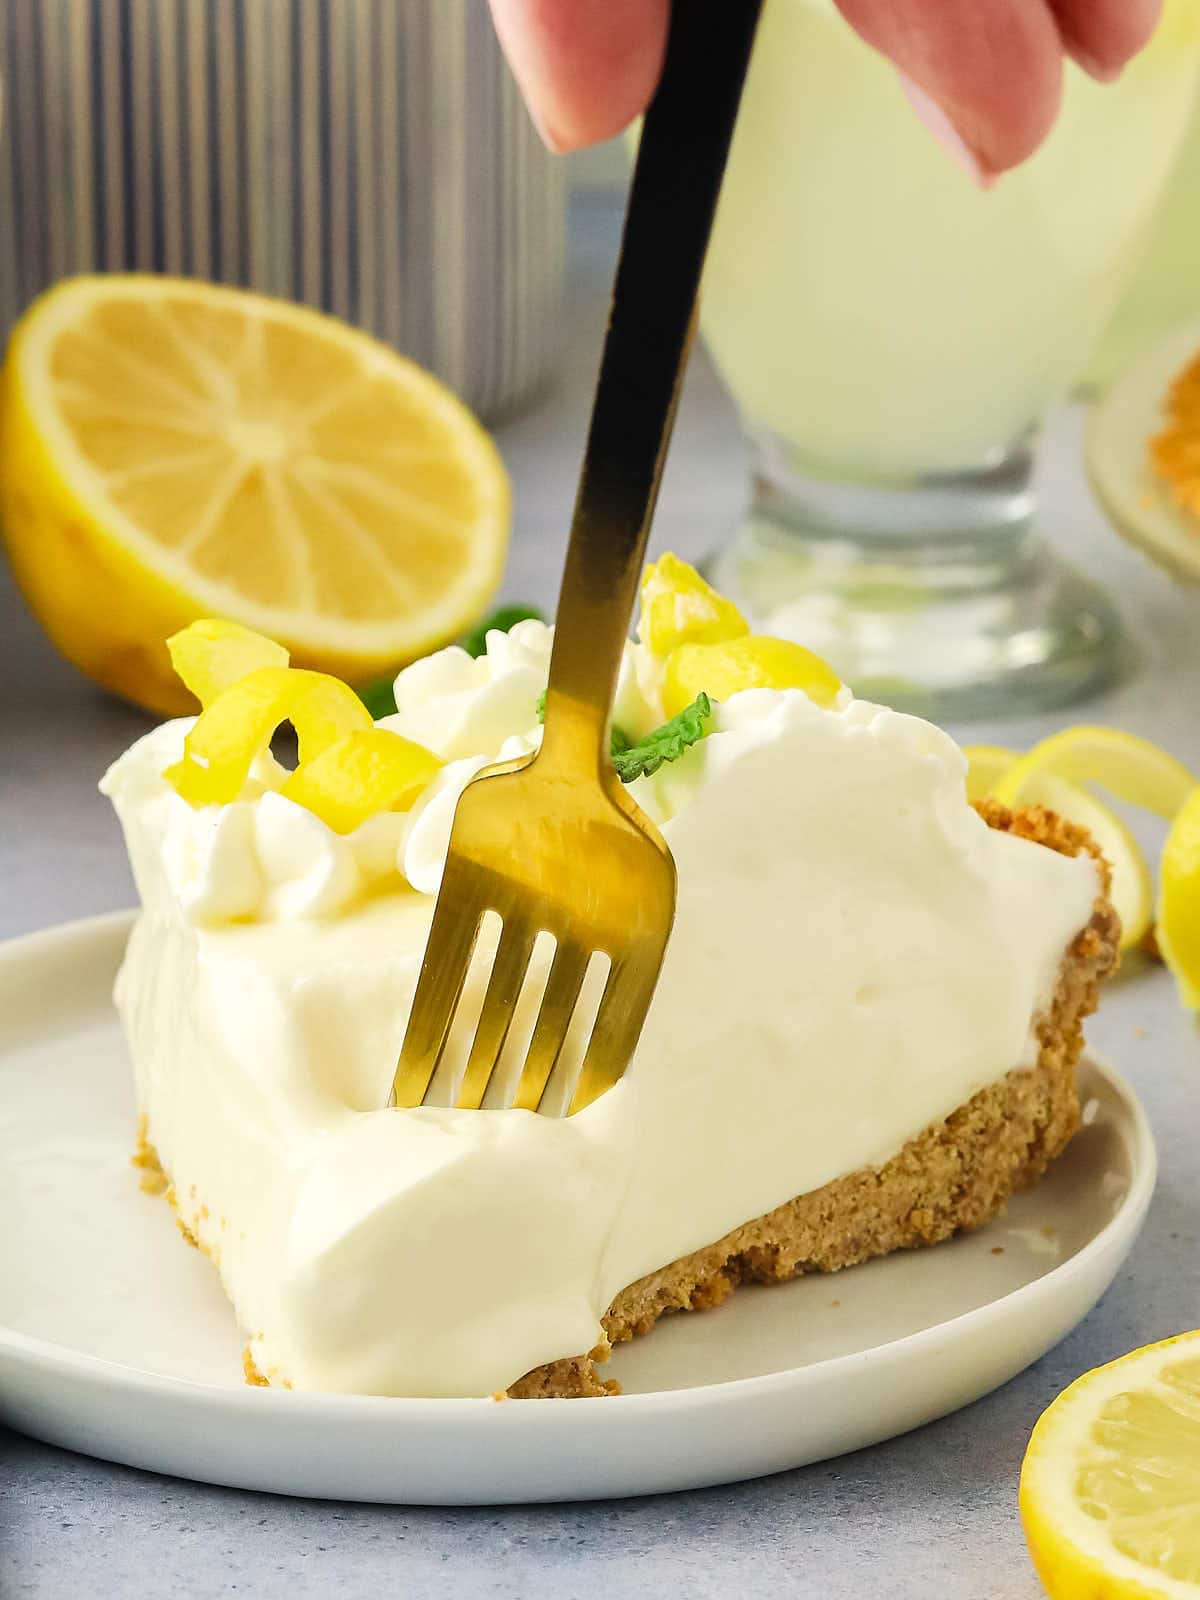 A slice of lemon pie with a fork.